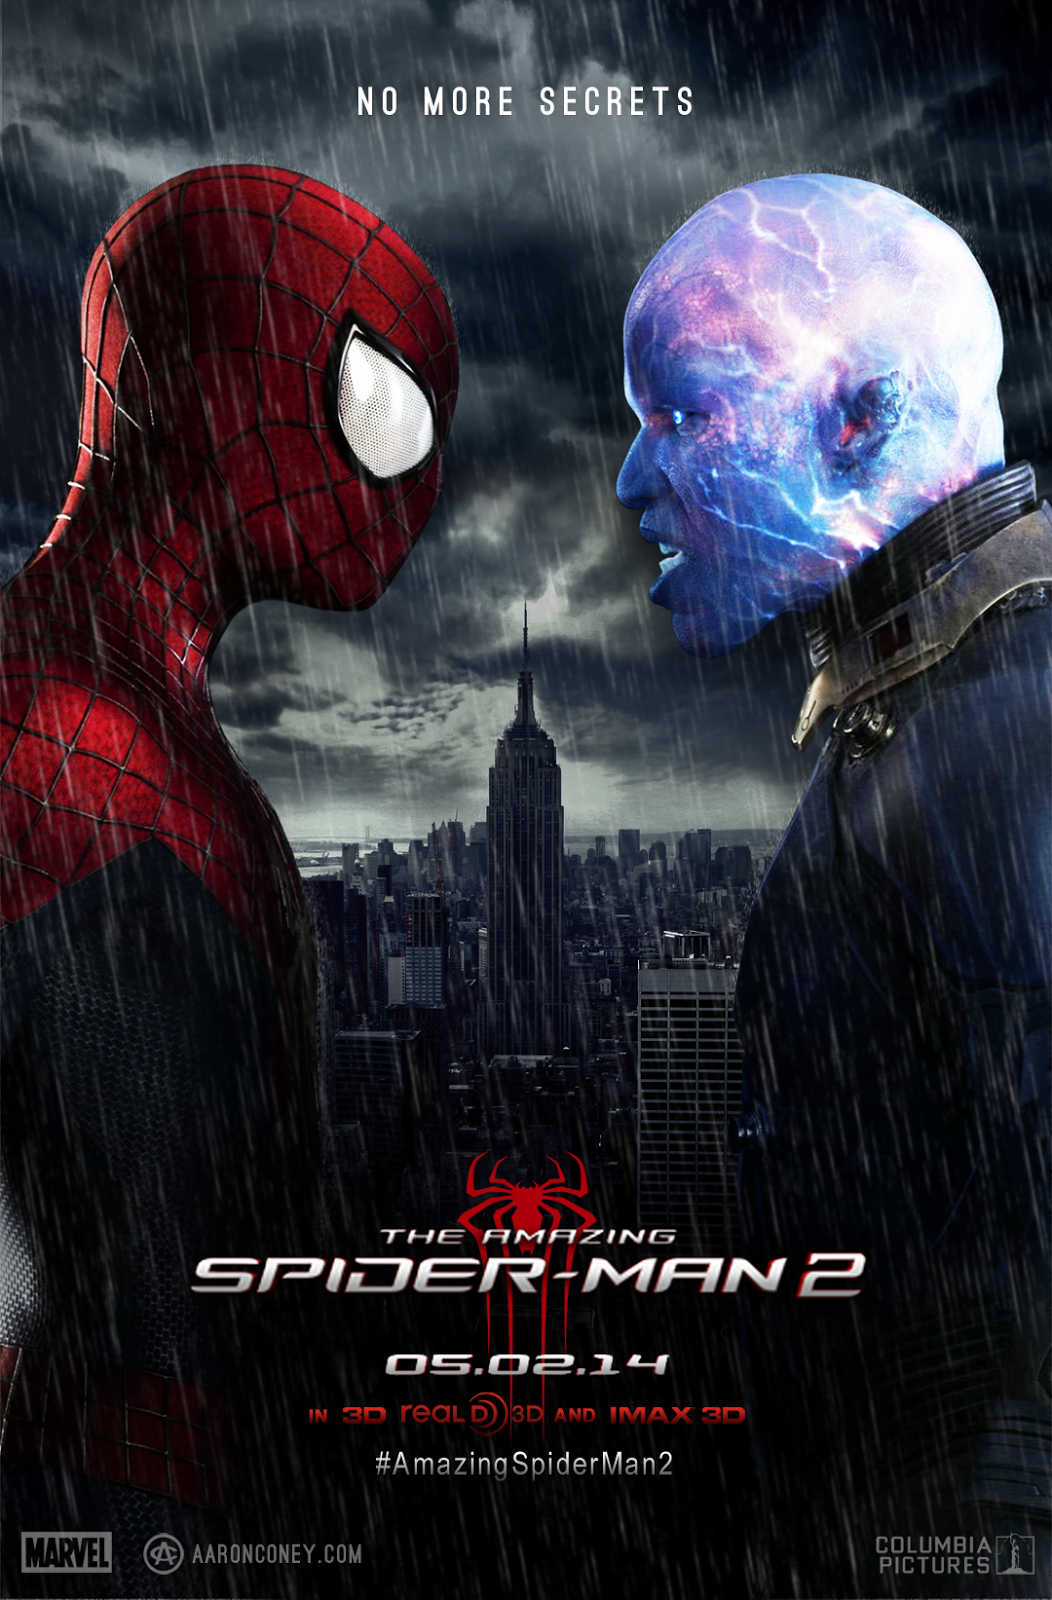 THE GIZZLE REVIEW: The Amazing Spider-Man 2 (2014) - Marc Webb